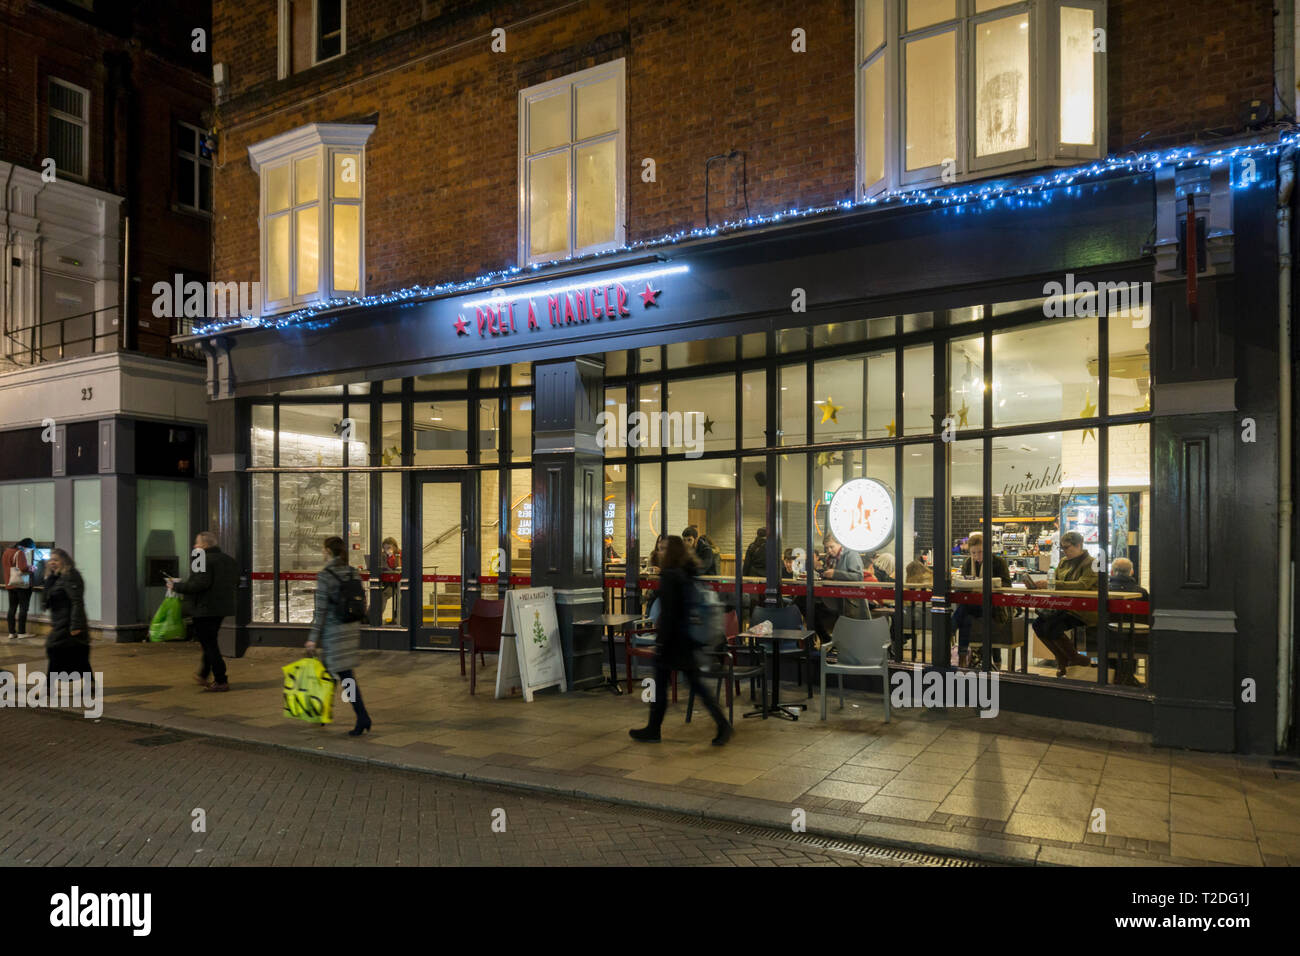 A branch of Pret a Manger sandwich bars in Cambridge at dusk. Stock Photo